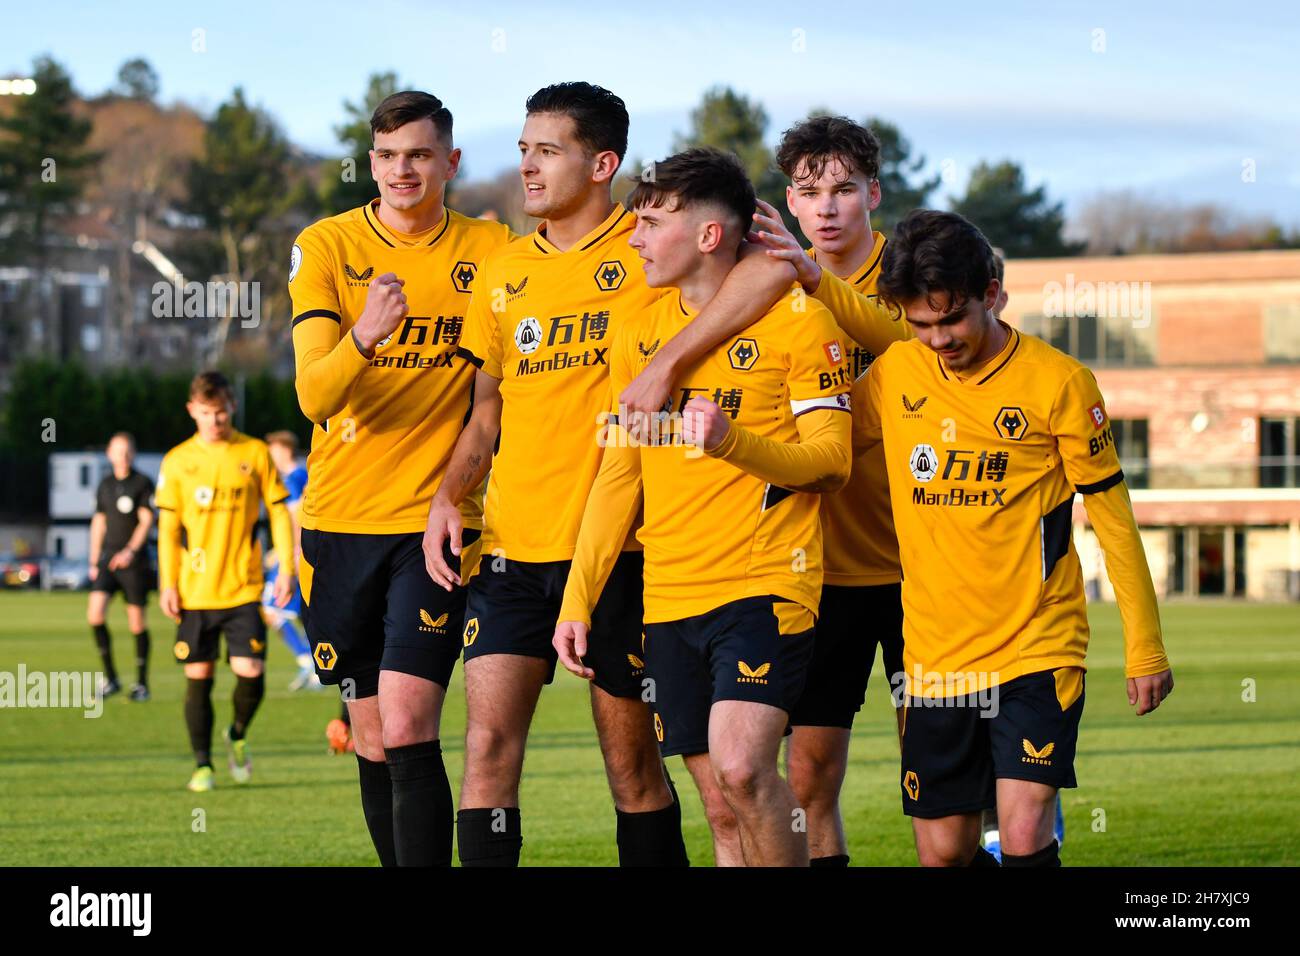 Swansea, UK. 25 November, 2021. The Wolves players celebrate their second goal during the Premier League Cup game between Swansea City Under 23s and Wolverhampton Wanderers Under 23s at the Swansea City Academy in Swansea, UK, UK on 25 November 2021. Credit: Duncan Thomas/Majestic Media. Credit: Majestic Media Ltd/Alamy Live News Stock Photo